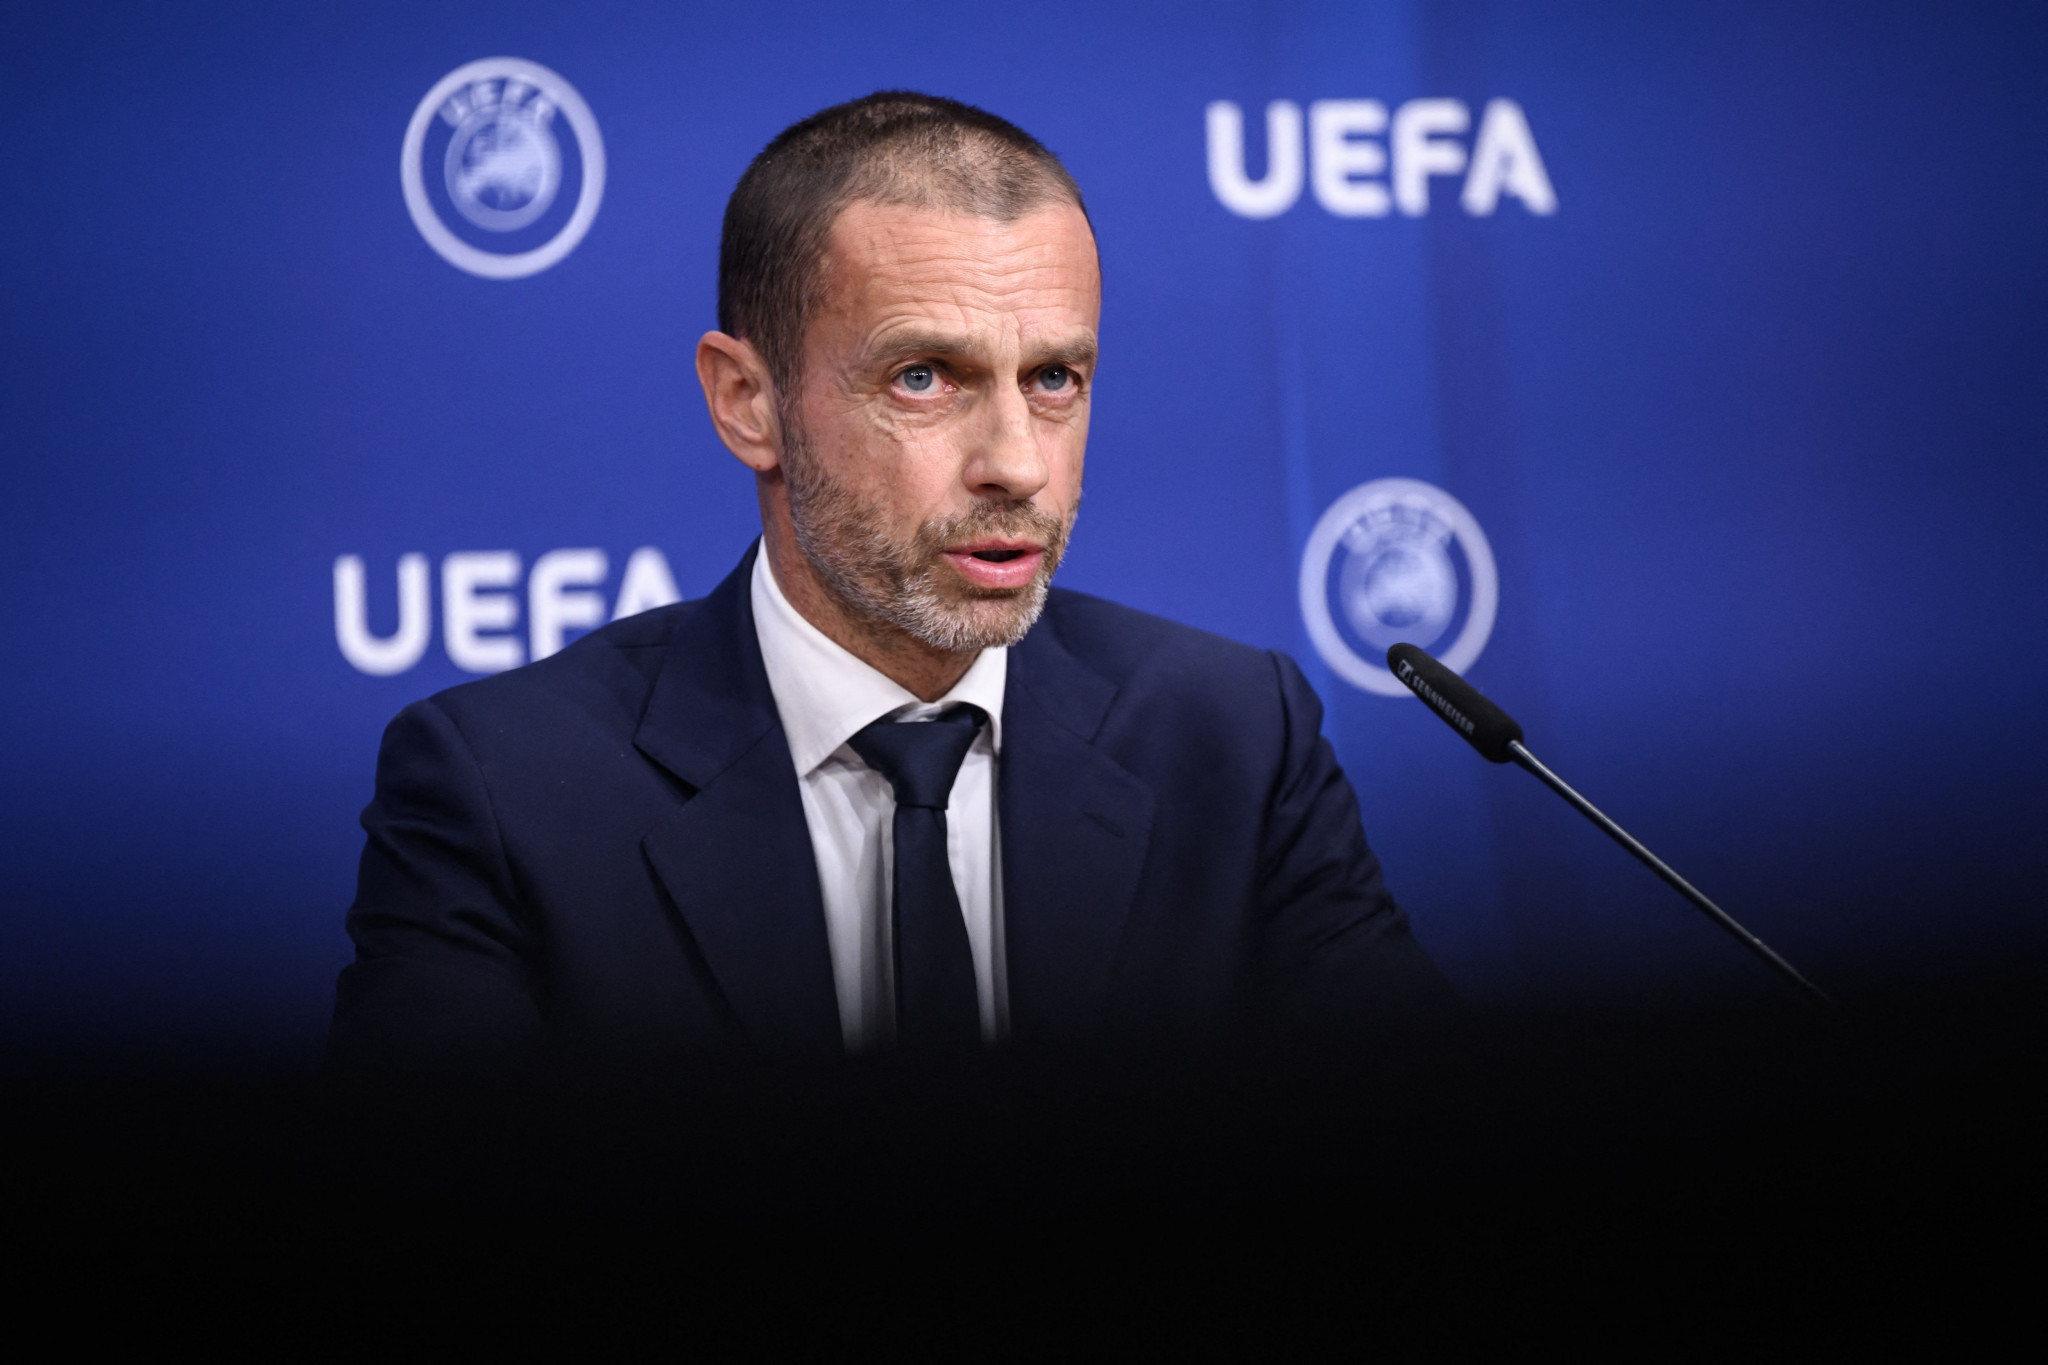 Law firms representing Liverpool supporters are calling on UEFA President Aleksander Čeferin to accept responsibility for events at the Stade de France in the run-up to last year's Champions League Final ©Getty Images  